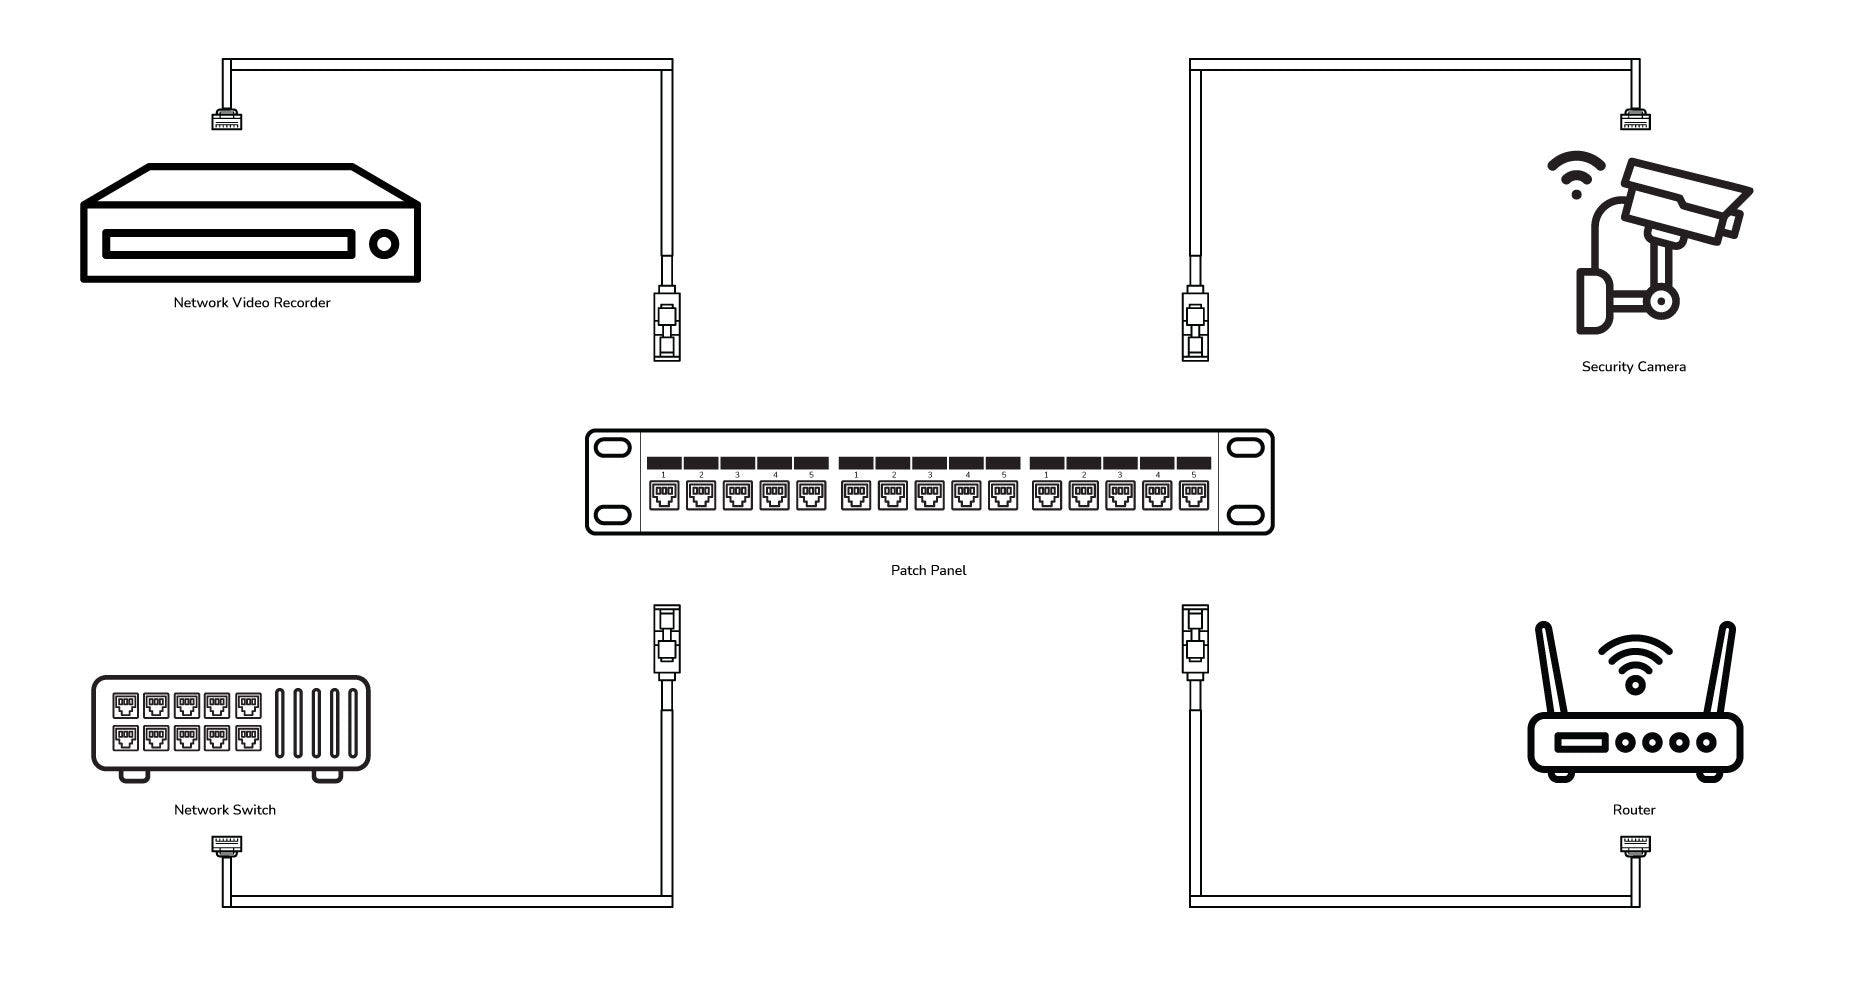 CAT6A Network 10G 24-Port Patch Panel, Staggered ports, 1U Rack Mount, Wire Management Support Bar